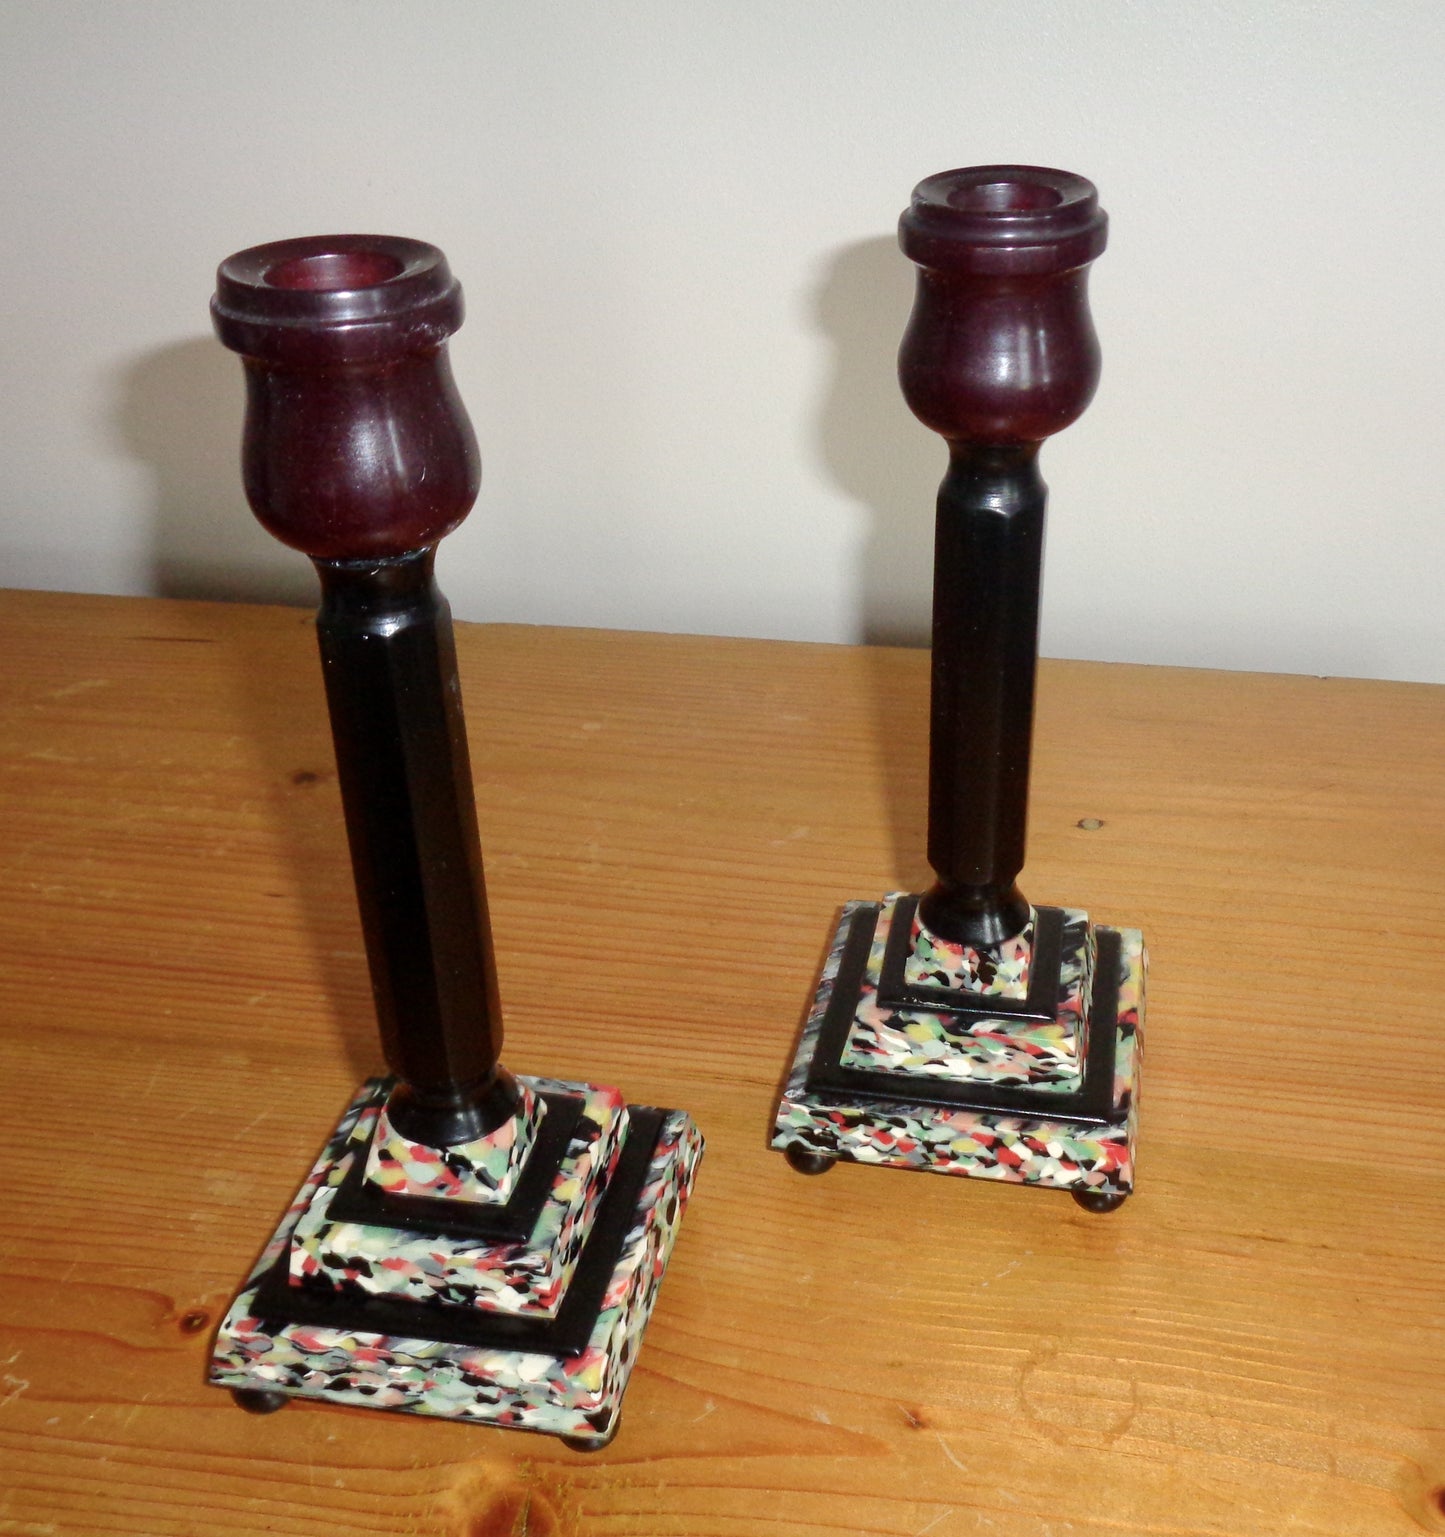 Pair Of Art Deco Mixed Bakelite And Catalin Candle Sticks With Original Green Candles